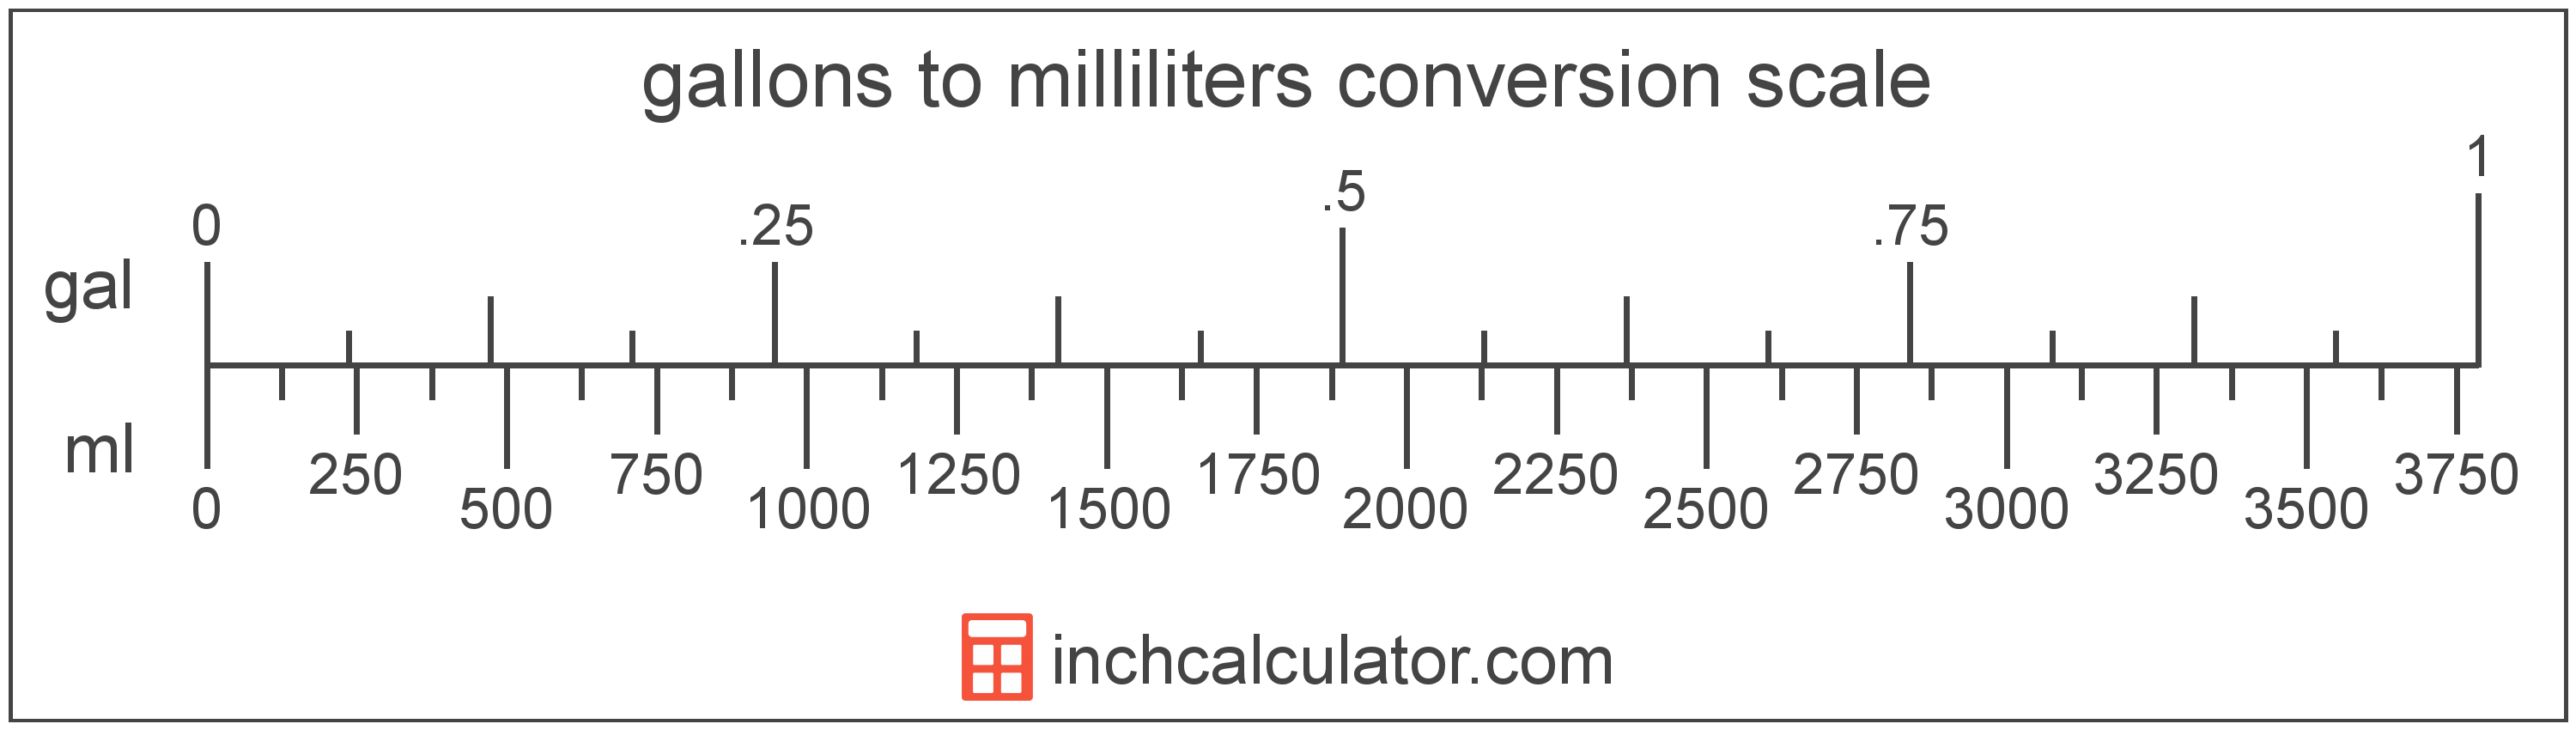 conversion scale showing gallons and equivalent milliliters volume values